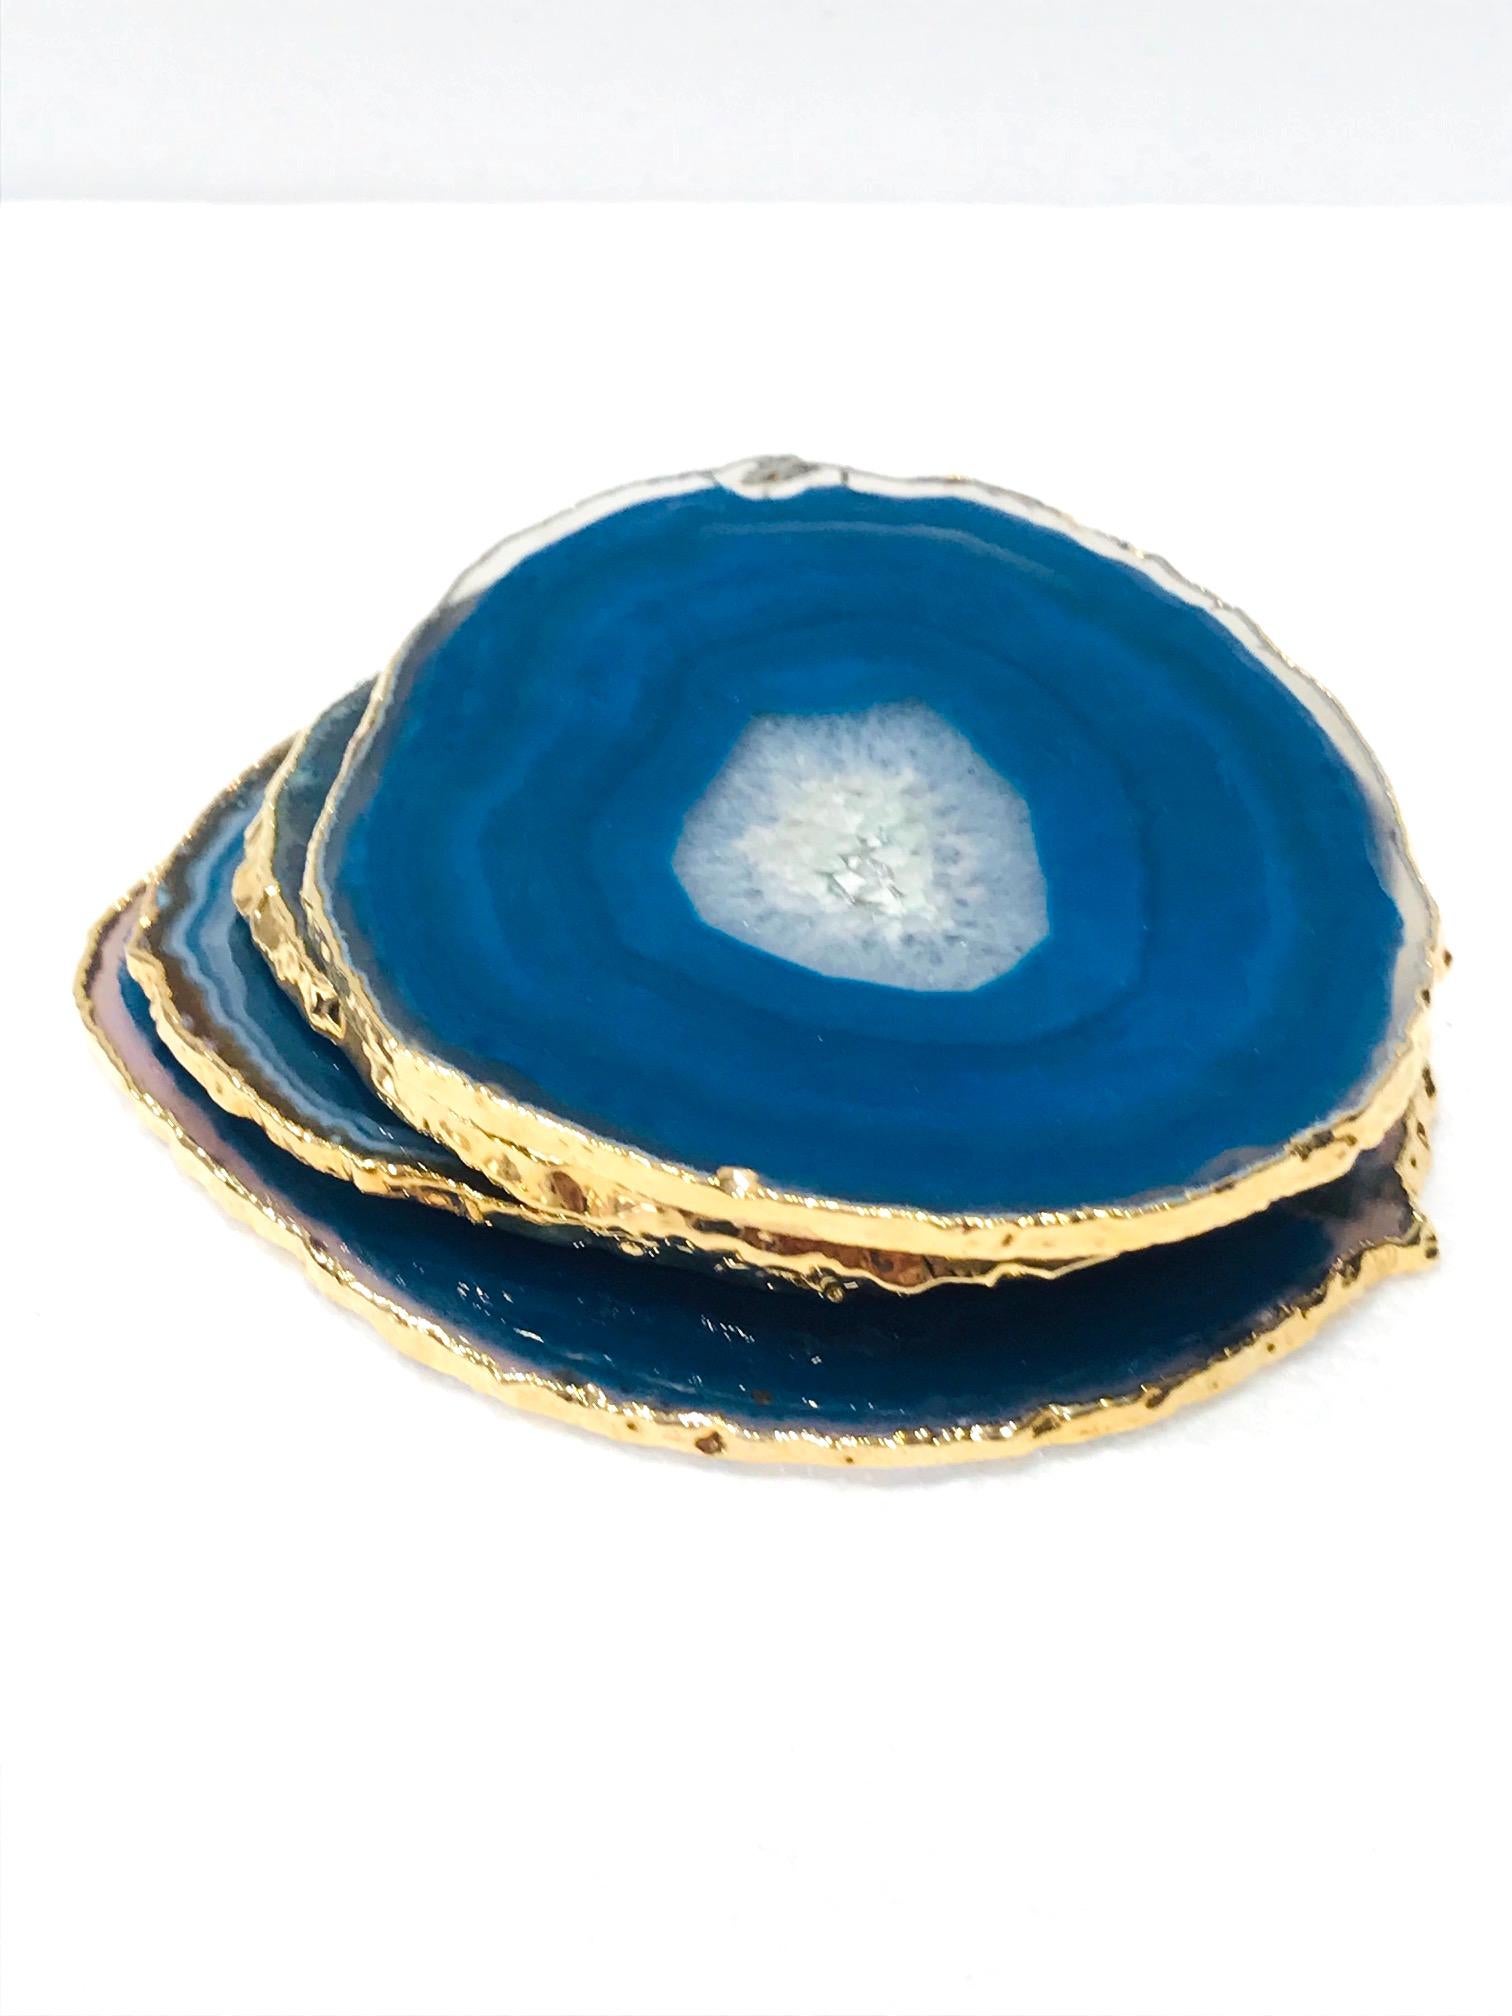 Semi-Precious Gemstone Coasters in Pink and Turquoise with 24k Gold Trim, Set /8 For Sale 2